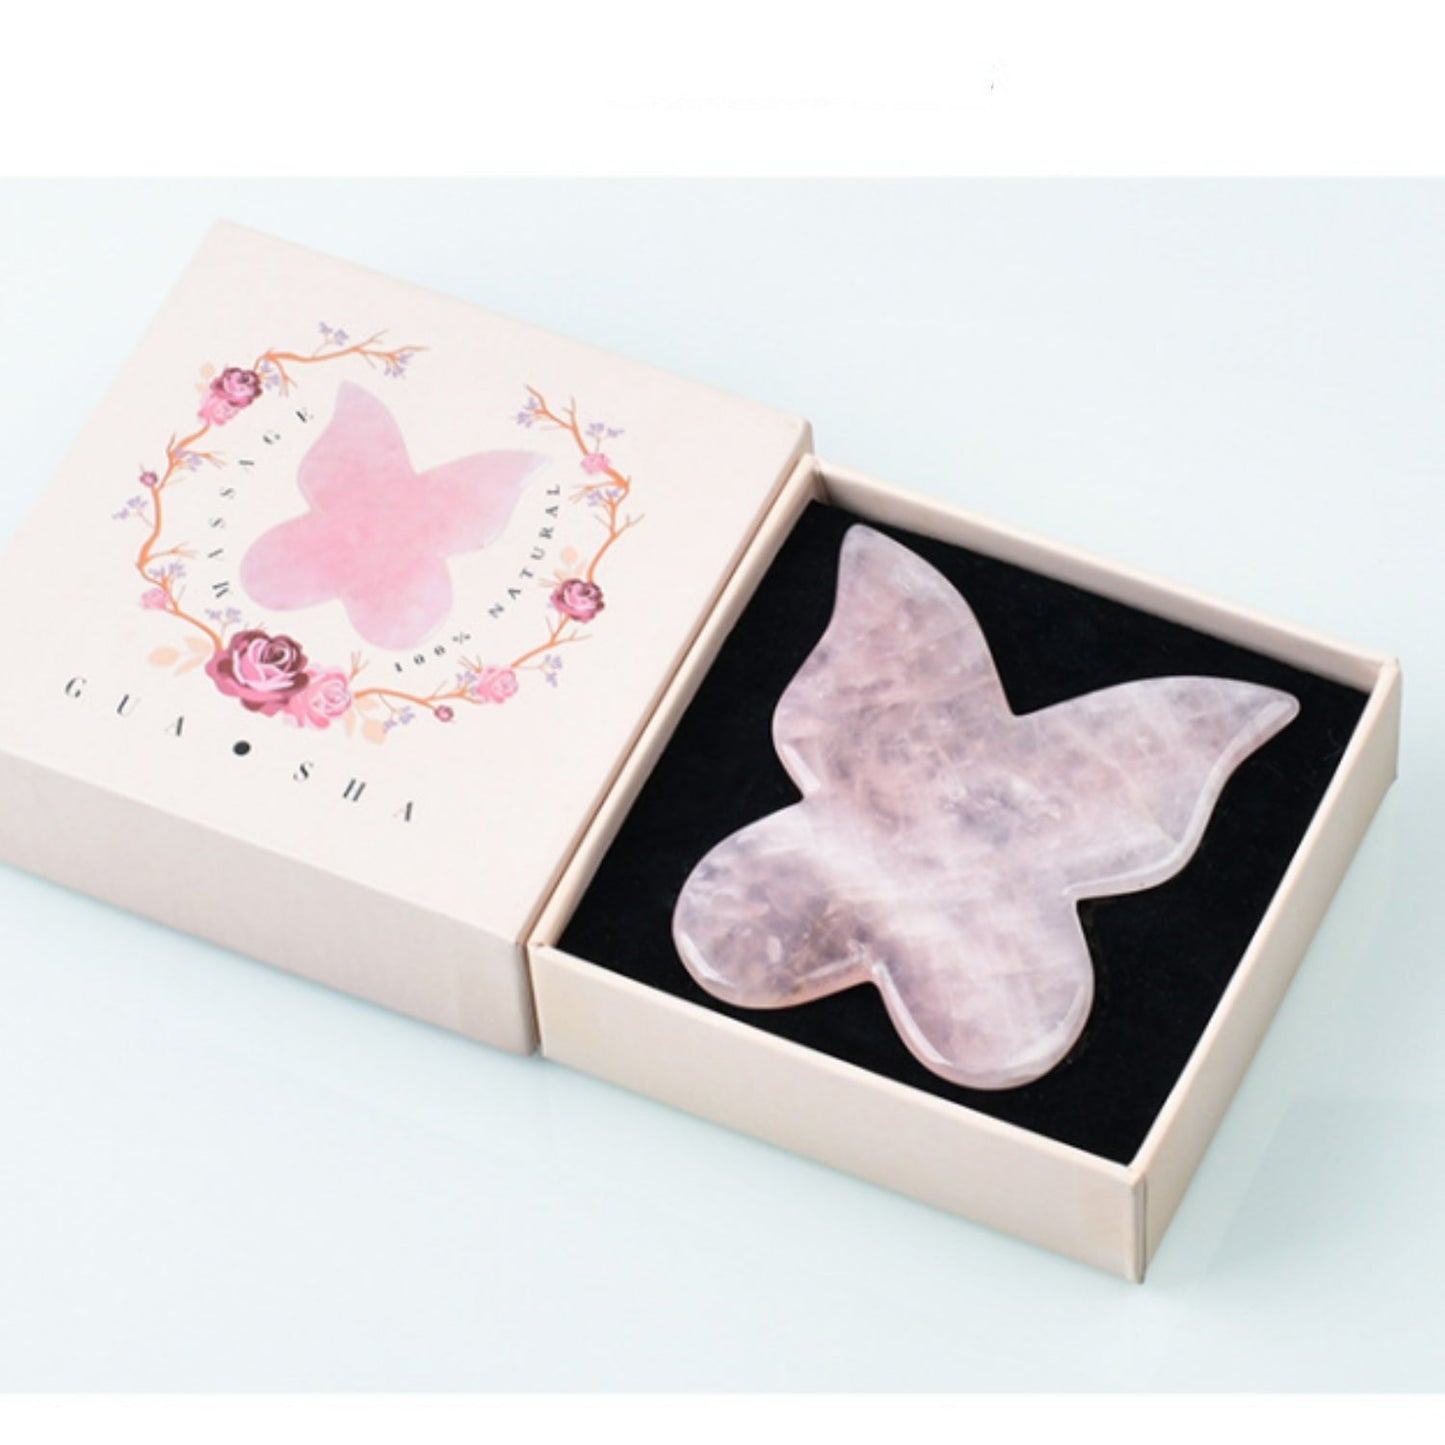 AOXILY Rose Quartz Butterfly Gua Sha Tool Aoxily CHN, Inc. All Rights Reserved.